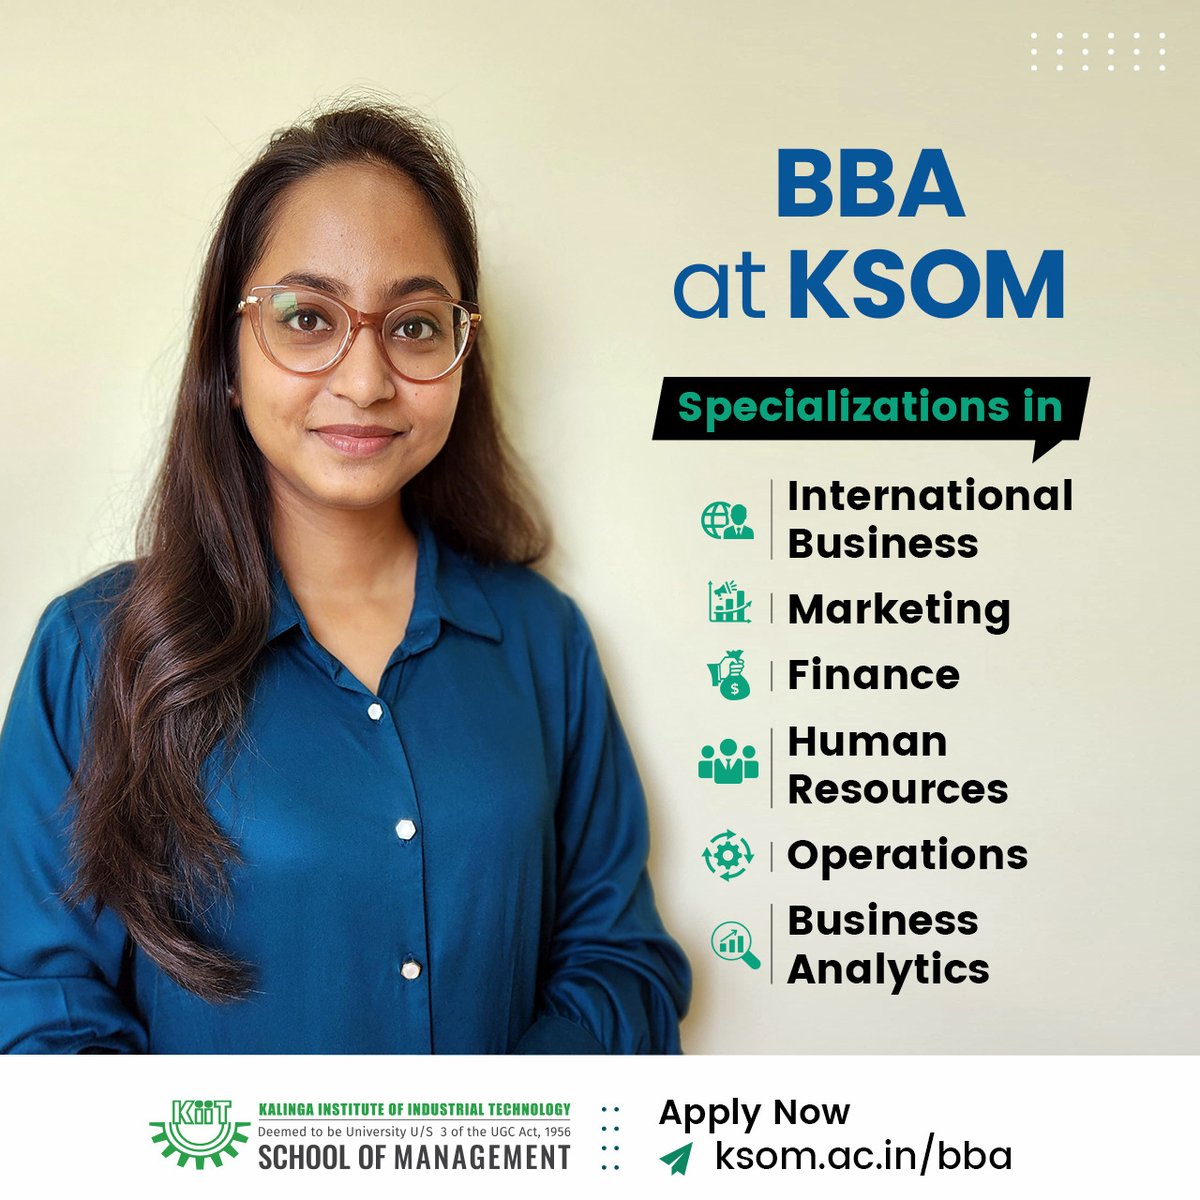 It is one of the few BBA programs in India that offers such varied specializations in the 3rd year.

Apply now at - ksom.ac.in/bba

#ksombbsr #bba #admissionsopen #kiit